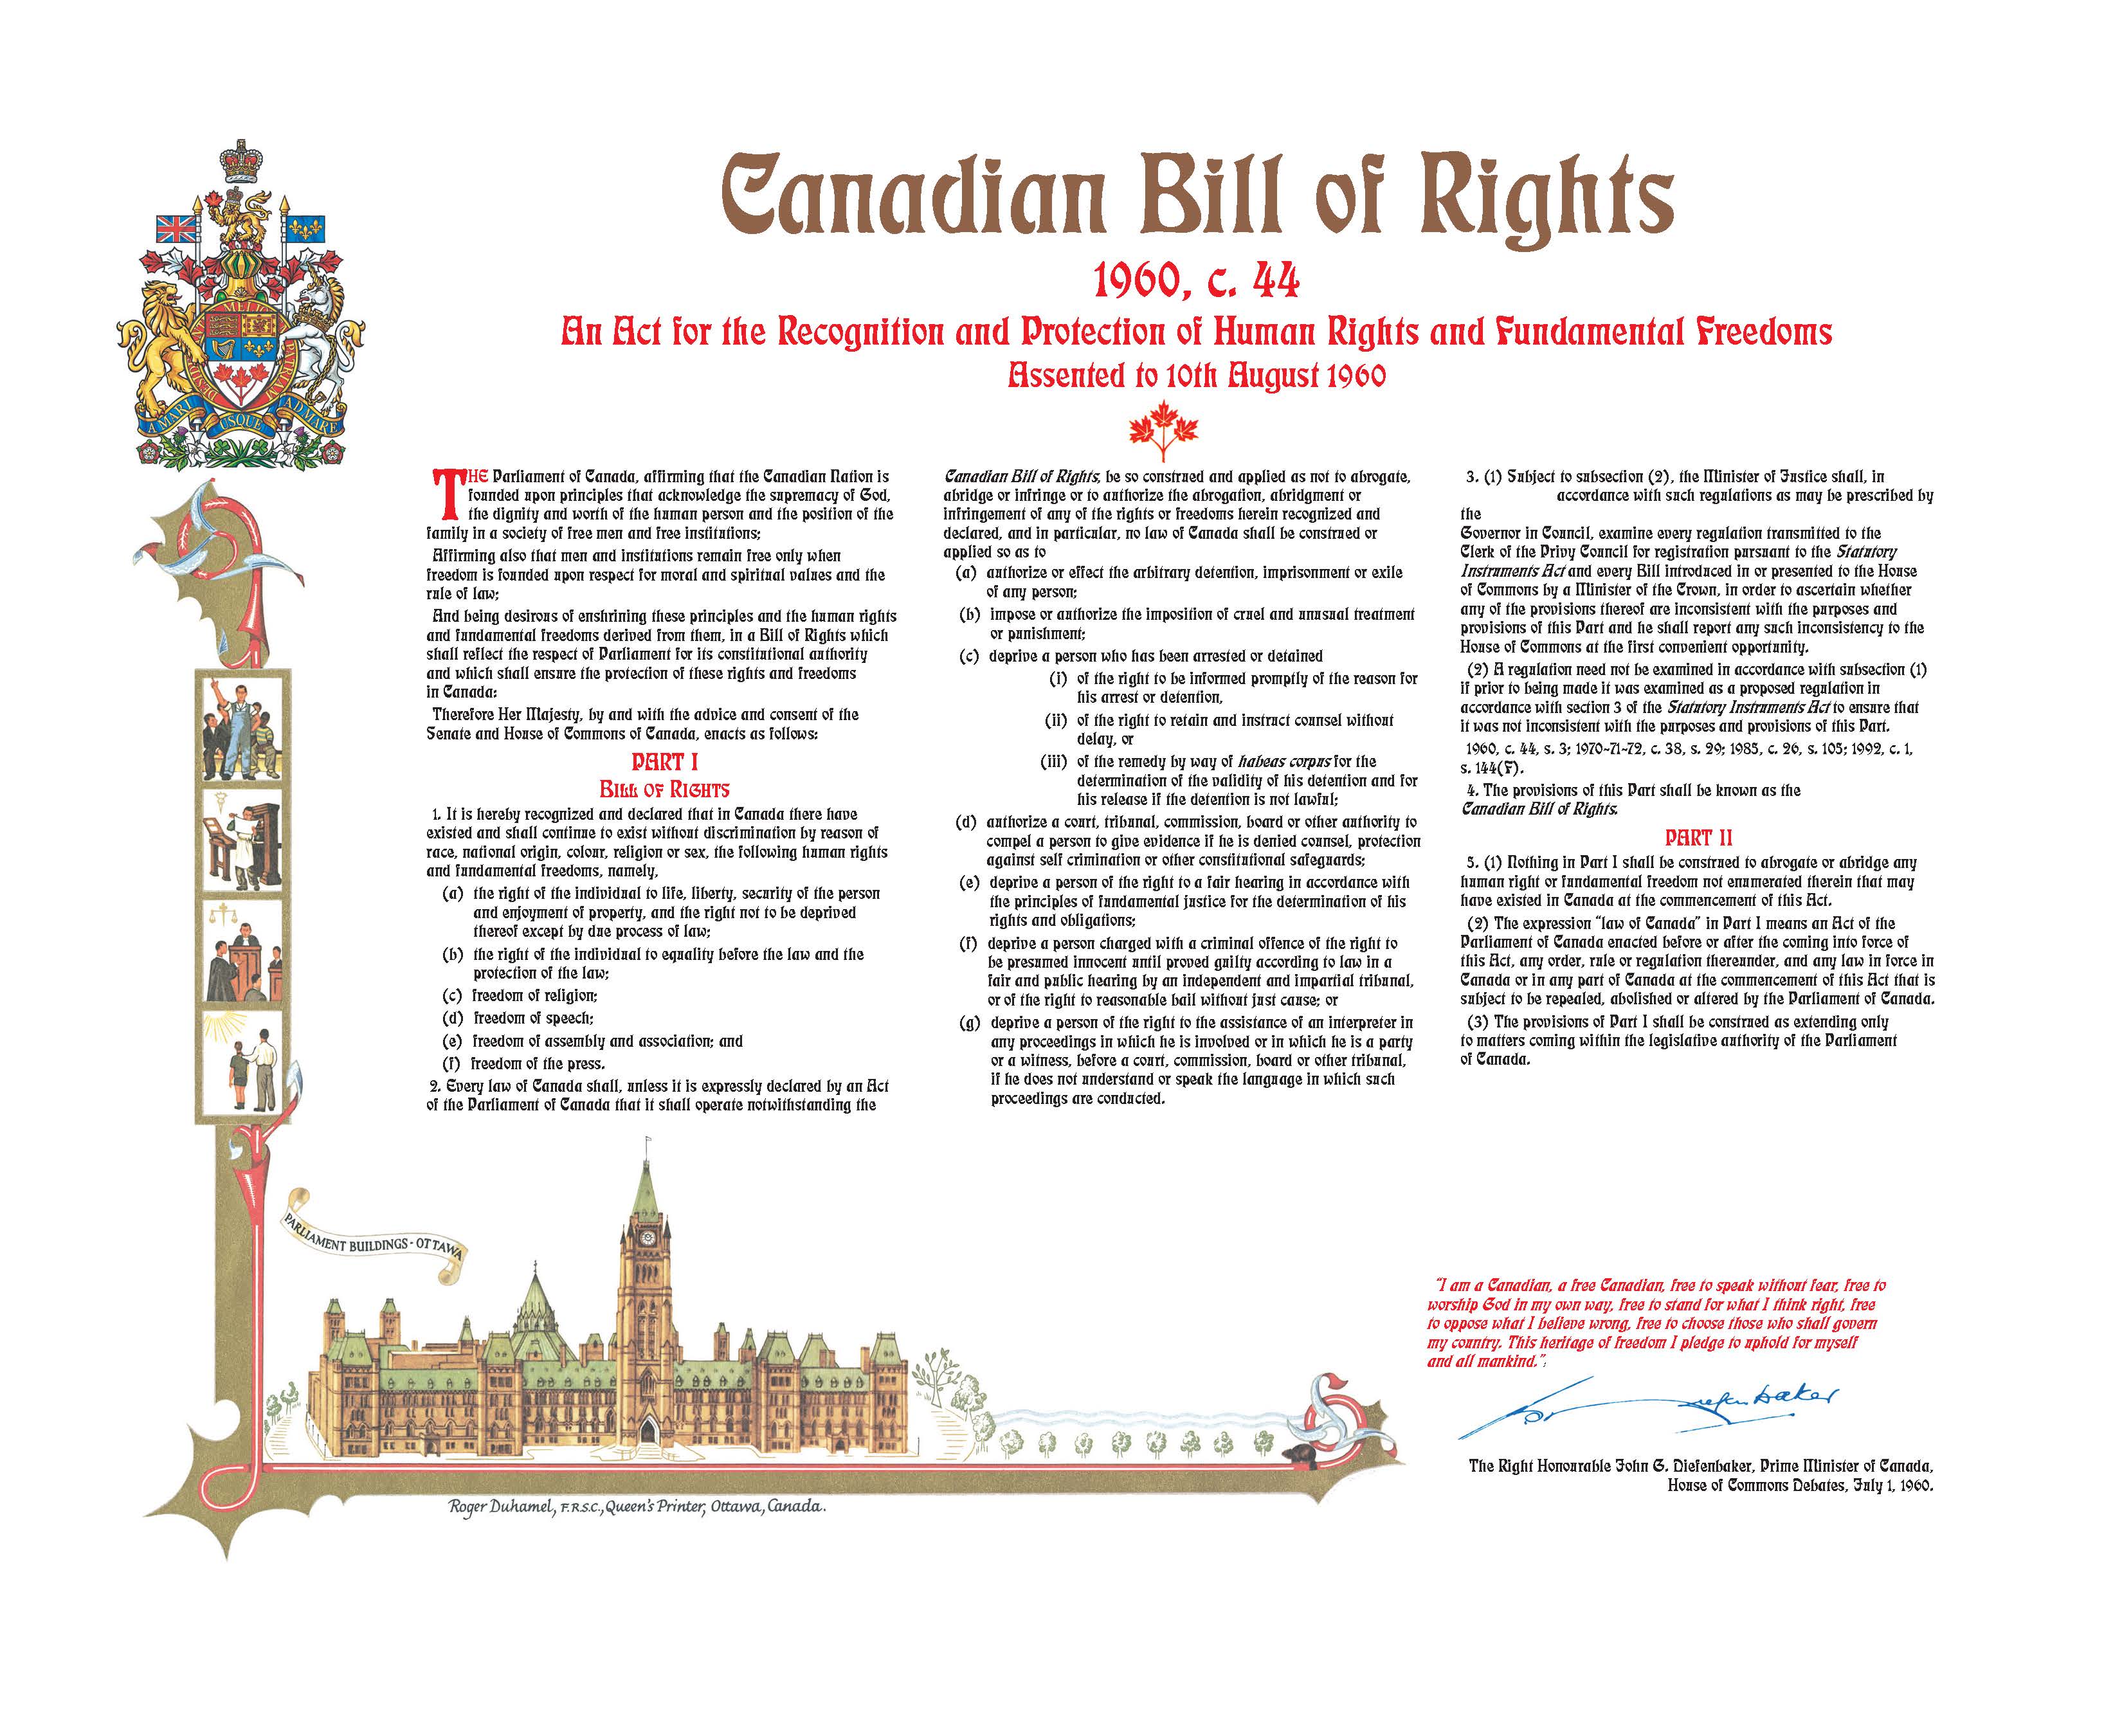 Image of the Canadian Bill of Rights Certificate